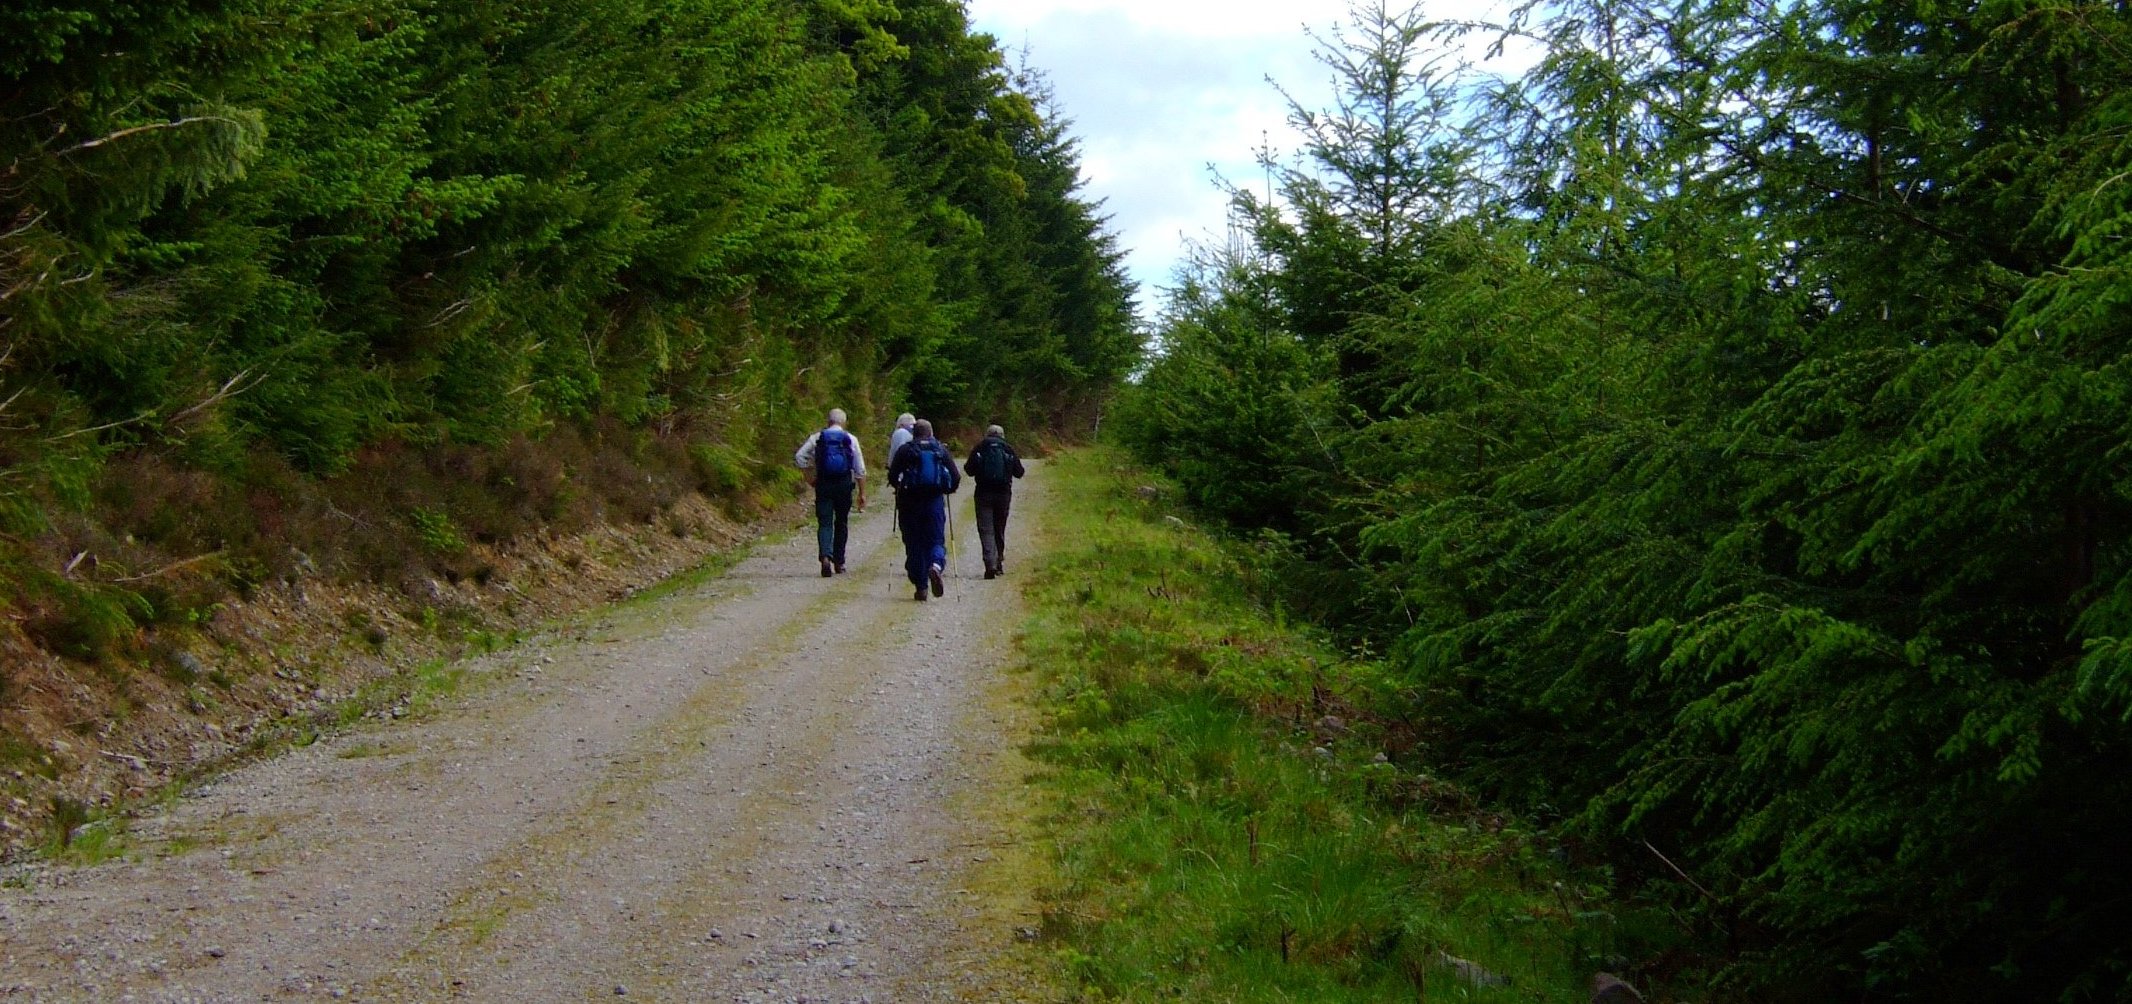 The forestry road from Invermoriston